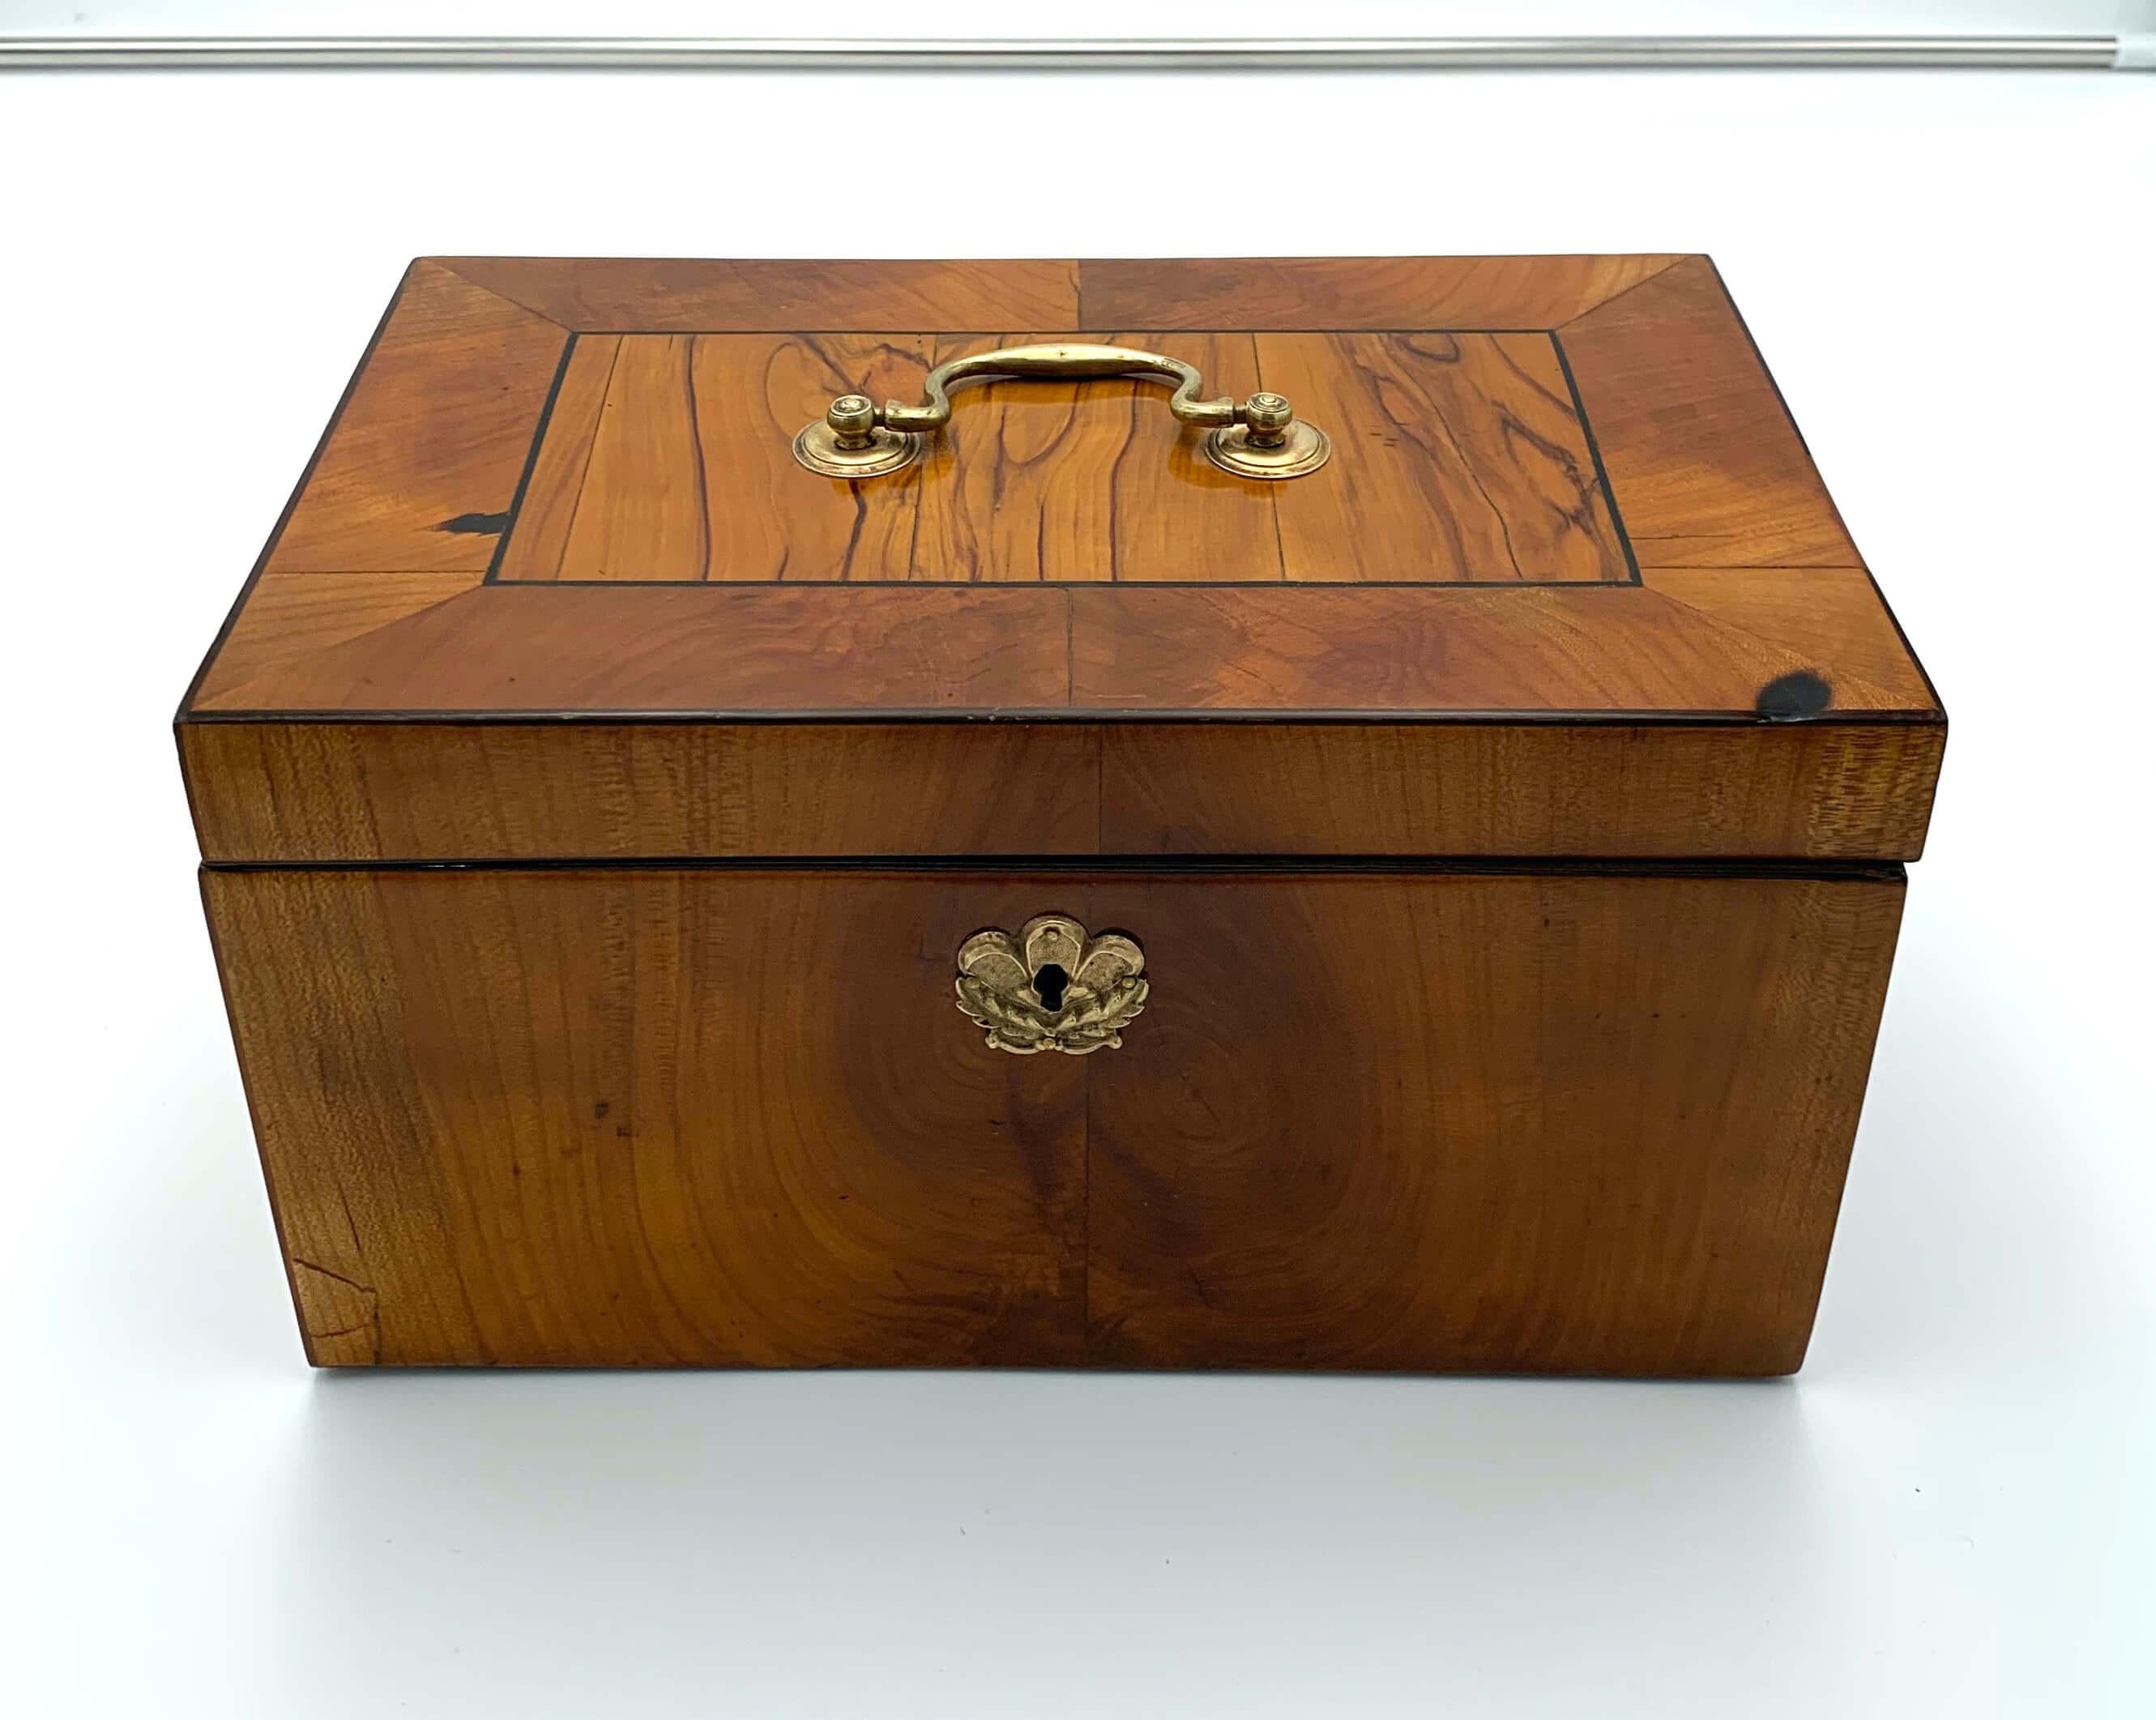 Cherry veneer and inlaid ebony. Original brass handle on the top.
Lock no longer available. Restored and shellac hand-polished

Dimensions: H 15.5 x W 29 x D 18.5 cm.